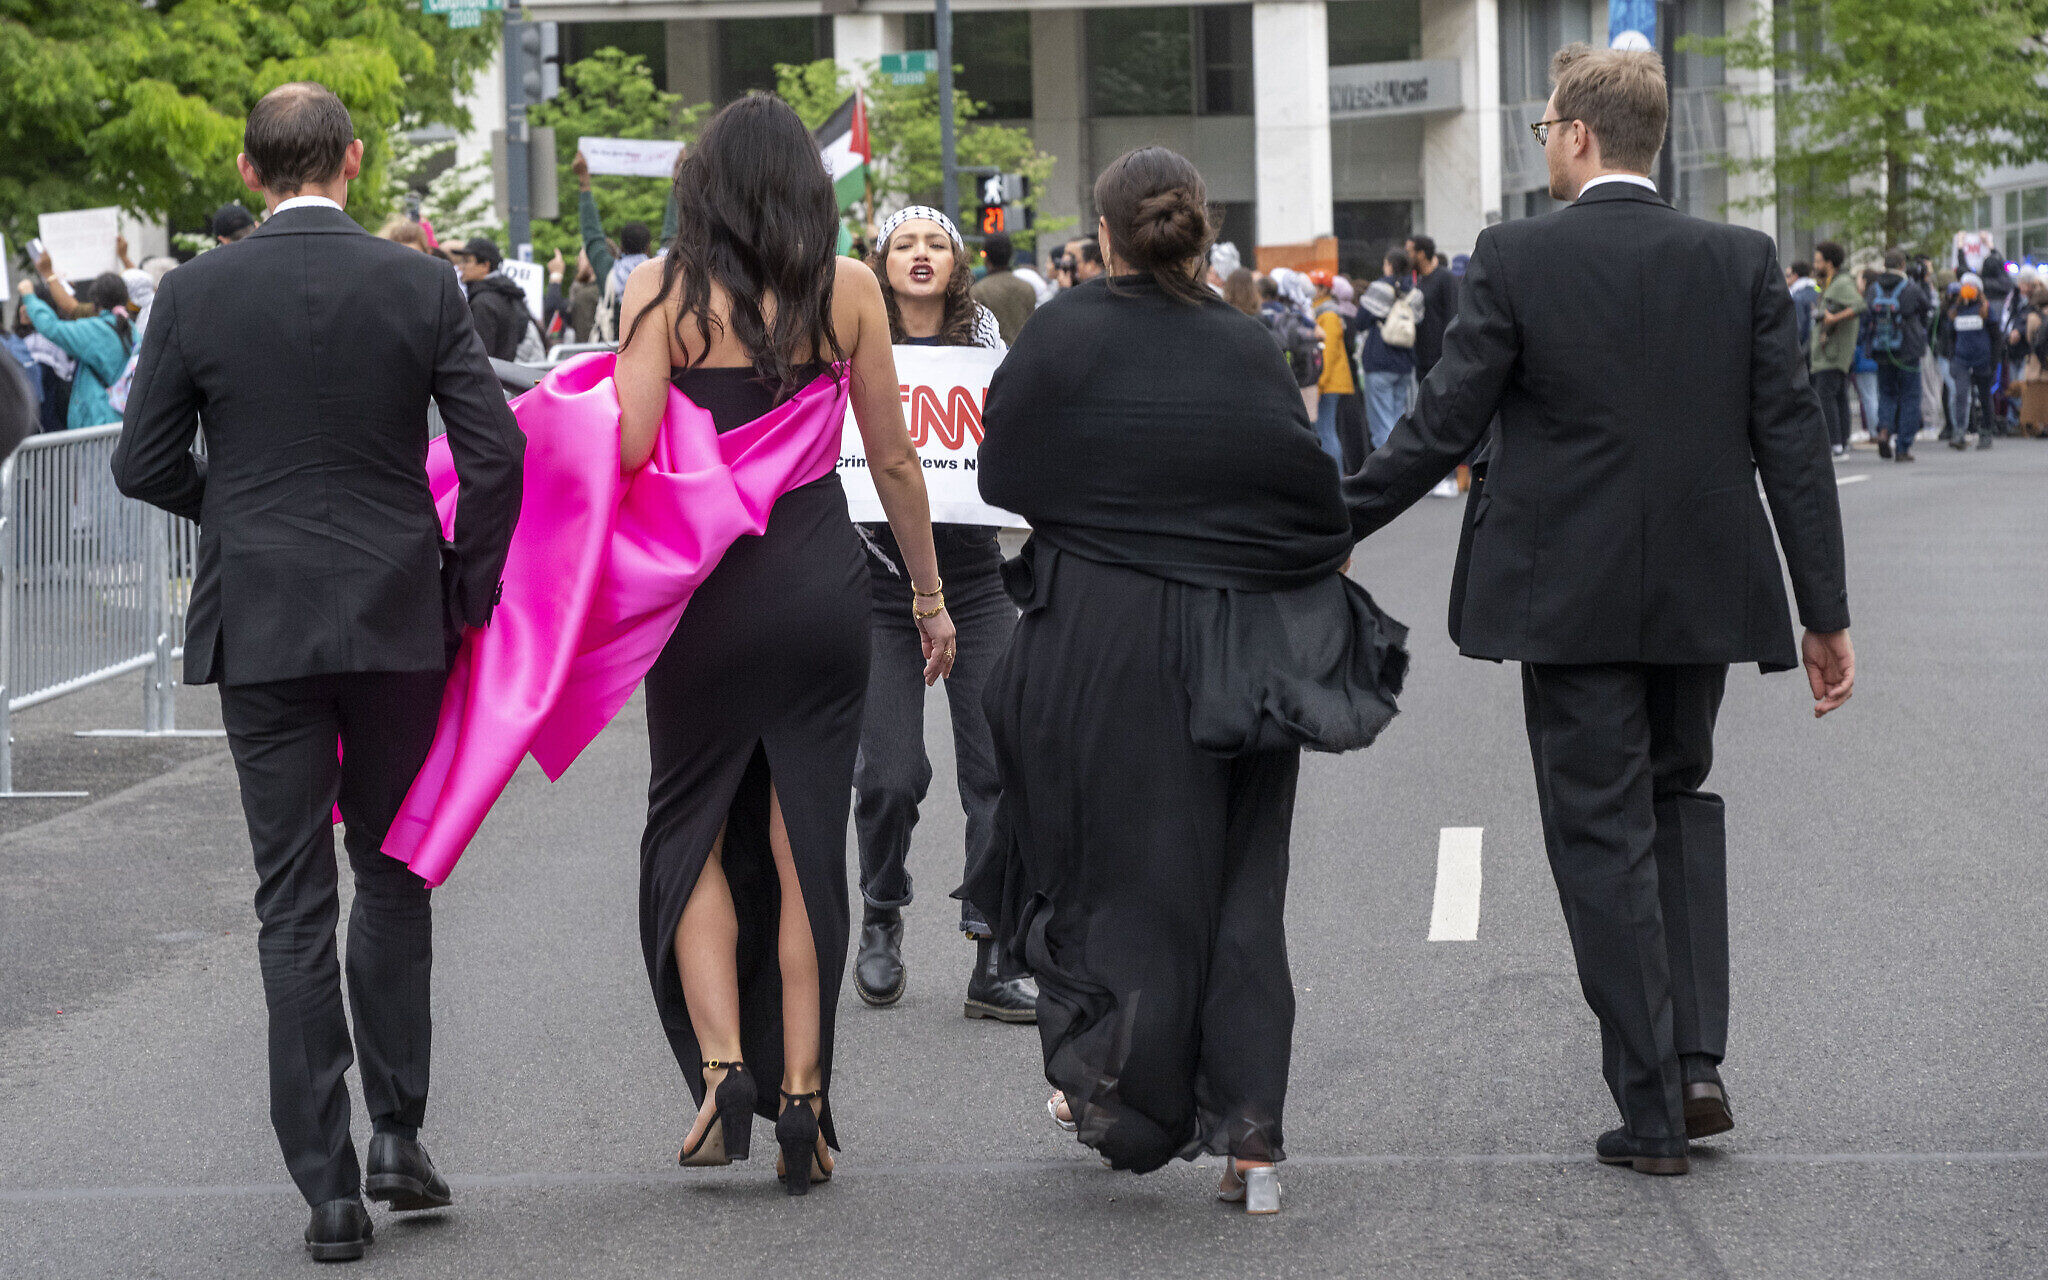 Guests arriving to White House correspondents' dinner greeted by antiIsrael protest The Times